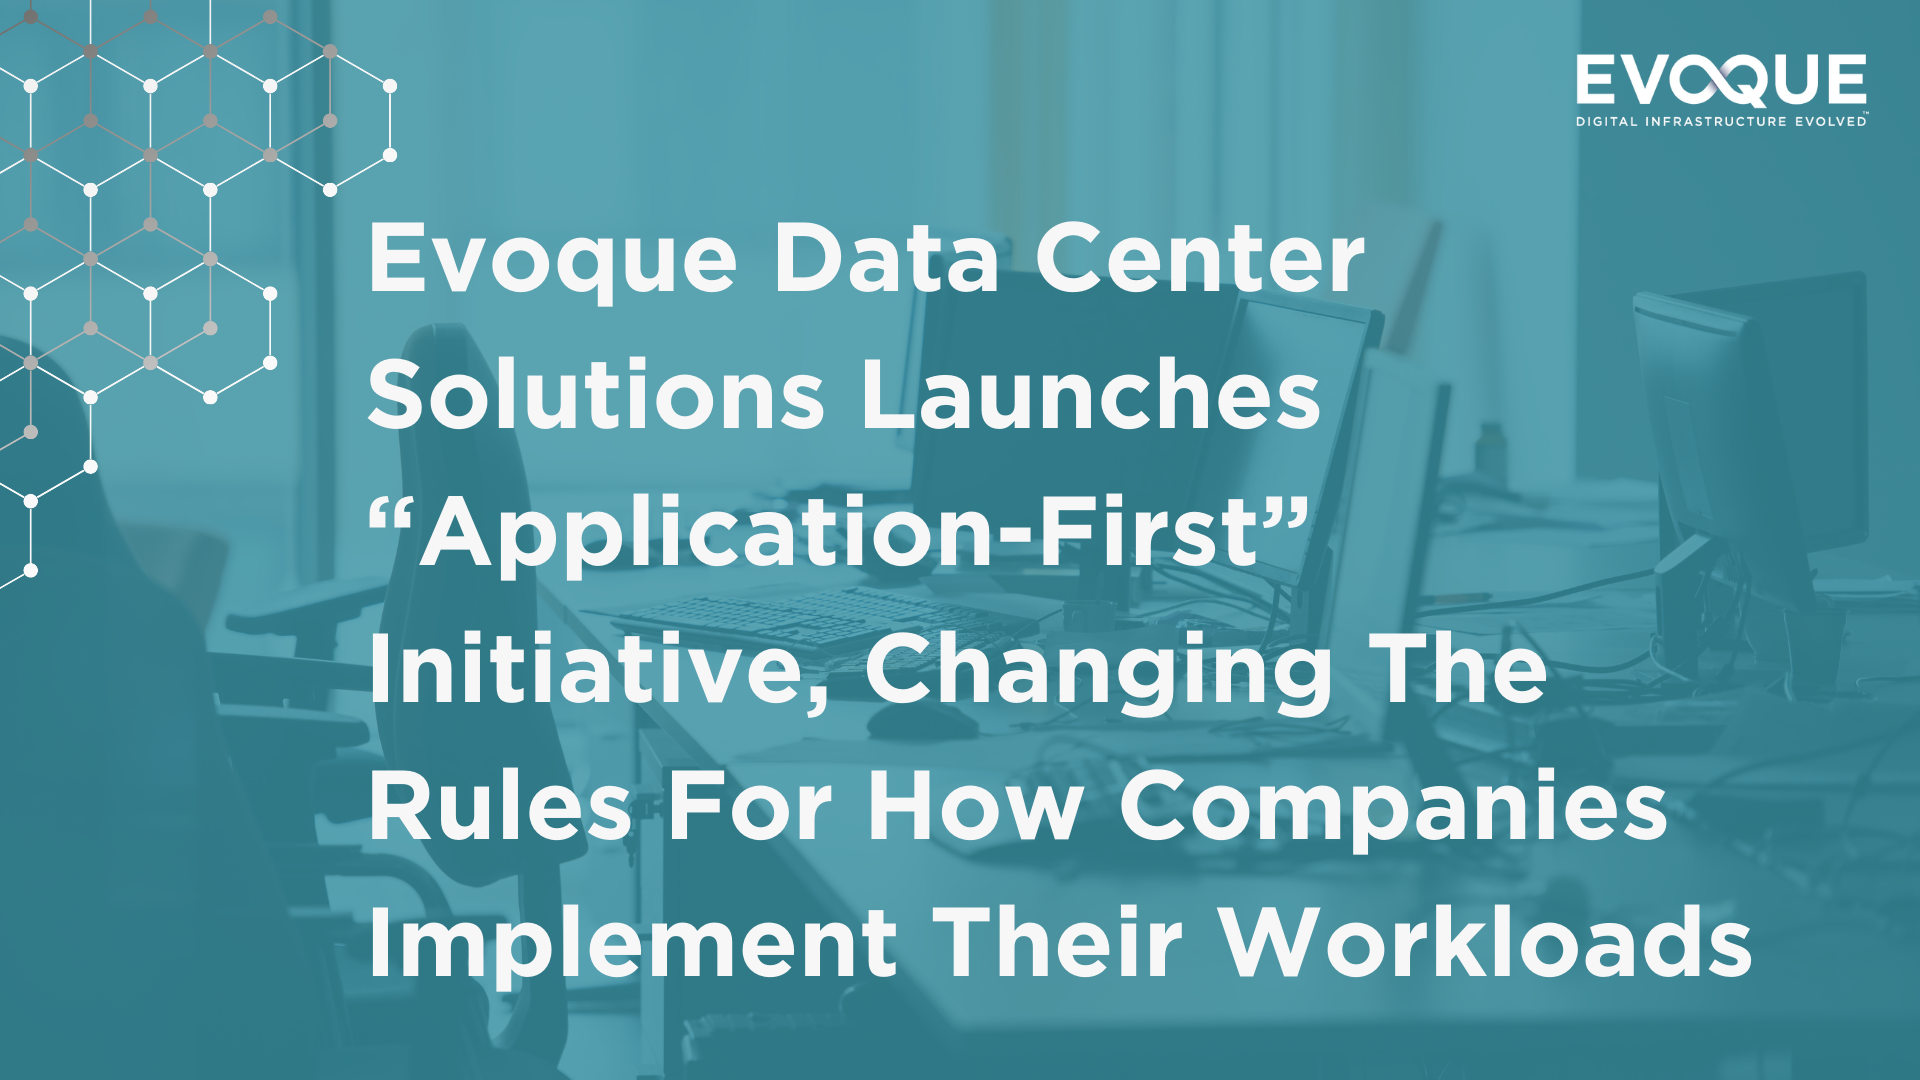 Evoque Data Center Solutions Launches “Application-First” Initiative, Changing The Rules For How Companies Implement Their Workloads